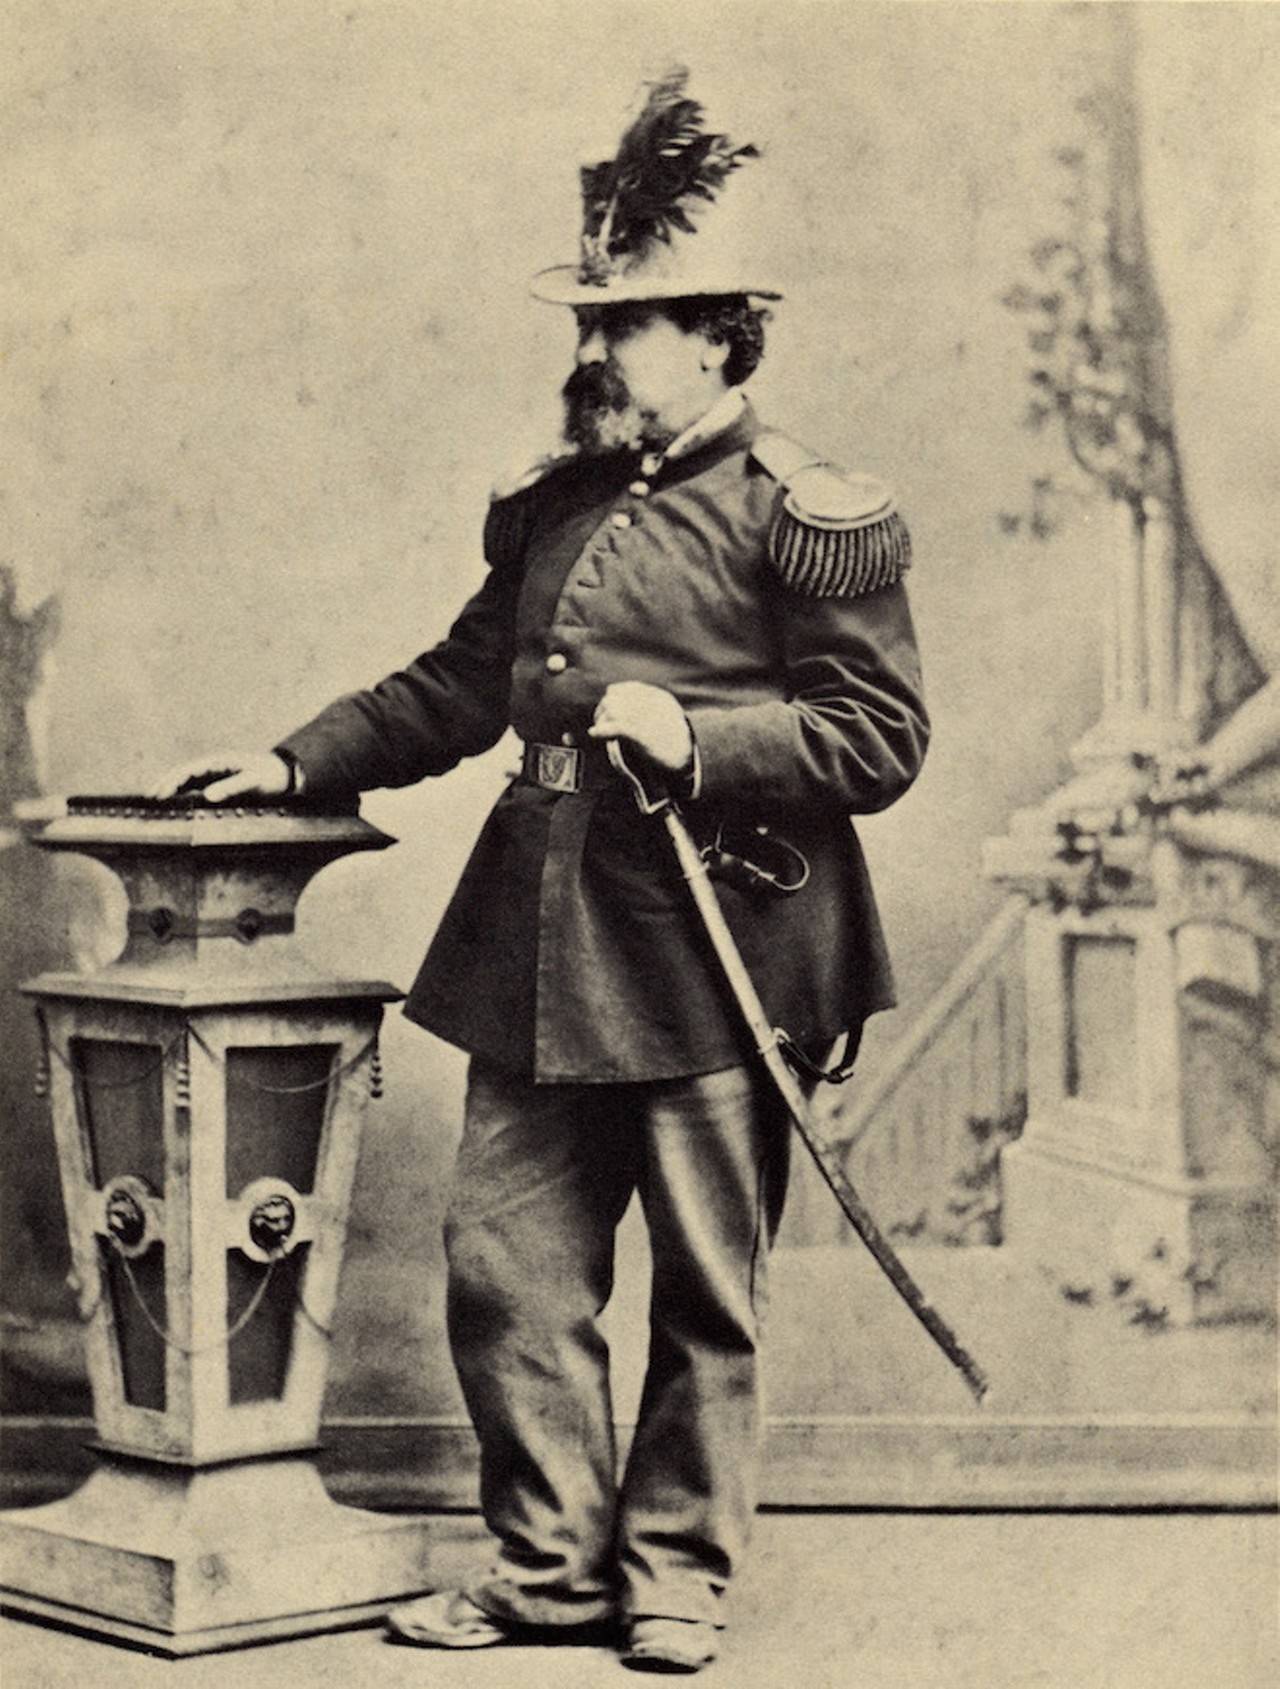 Wednesday, Sept. 17Emperor Norton DayReadings dealing with a San Francisco personality that declared himself Emperor of the United States in 1859